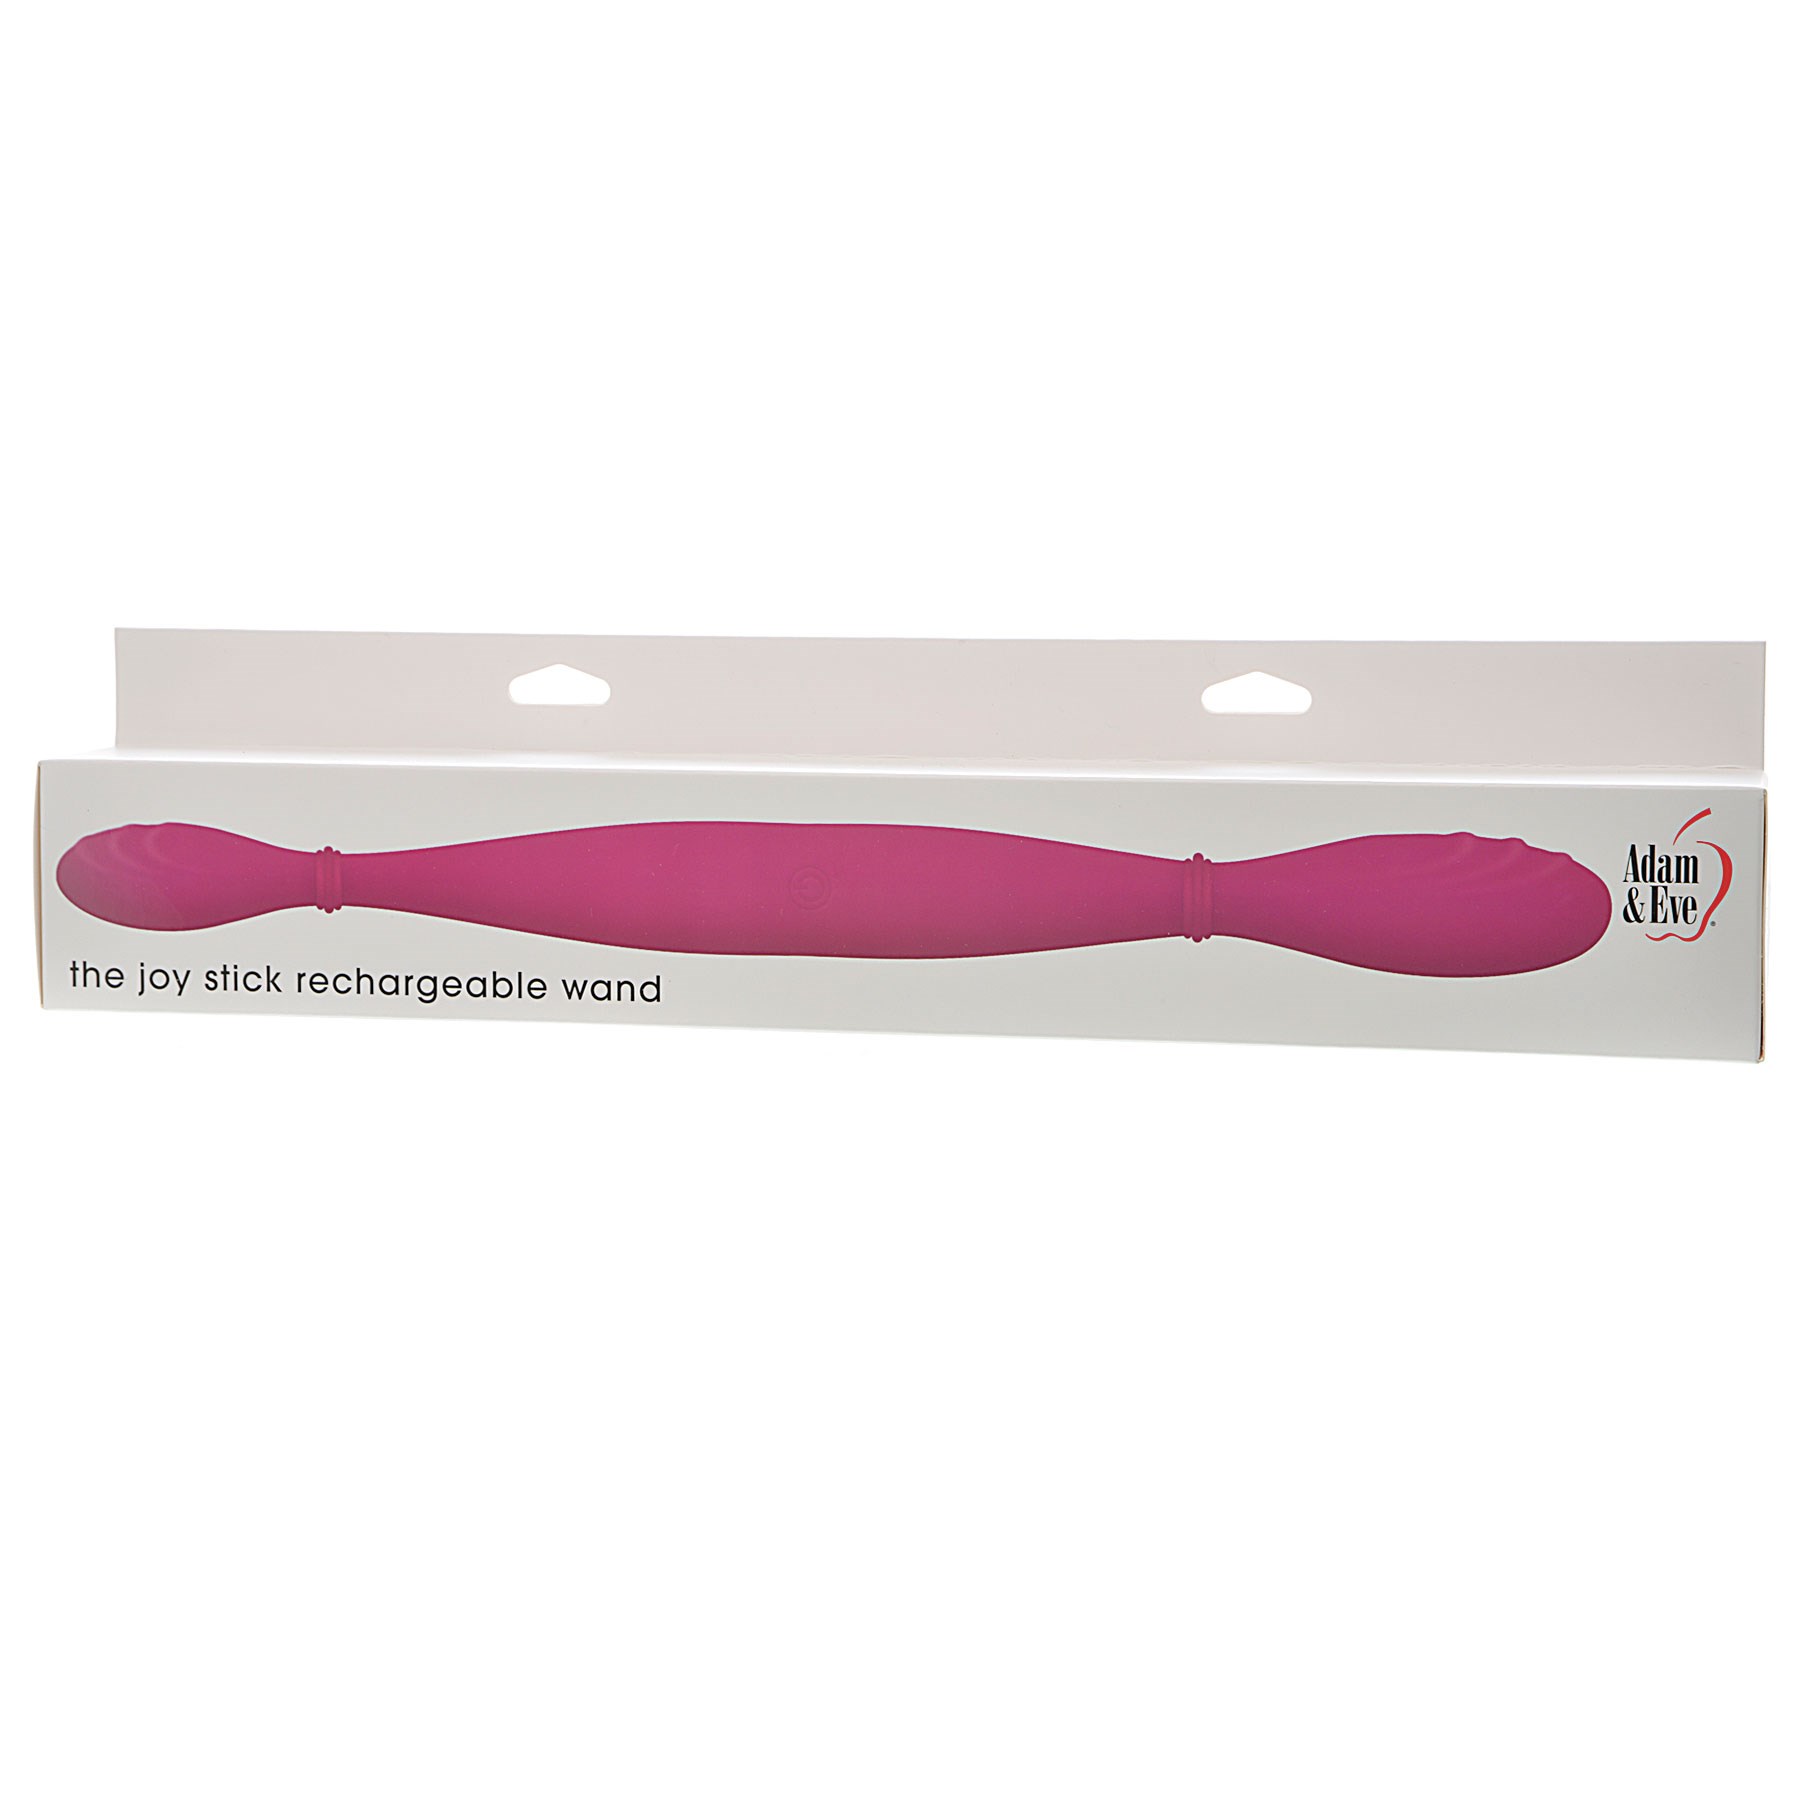 Adam & Eve The JoyStick Rechargeable Wand in box